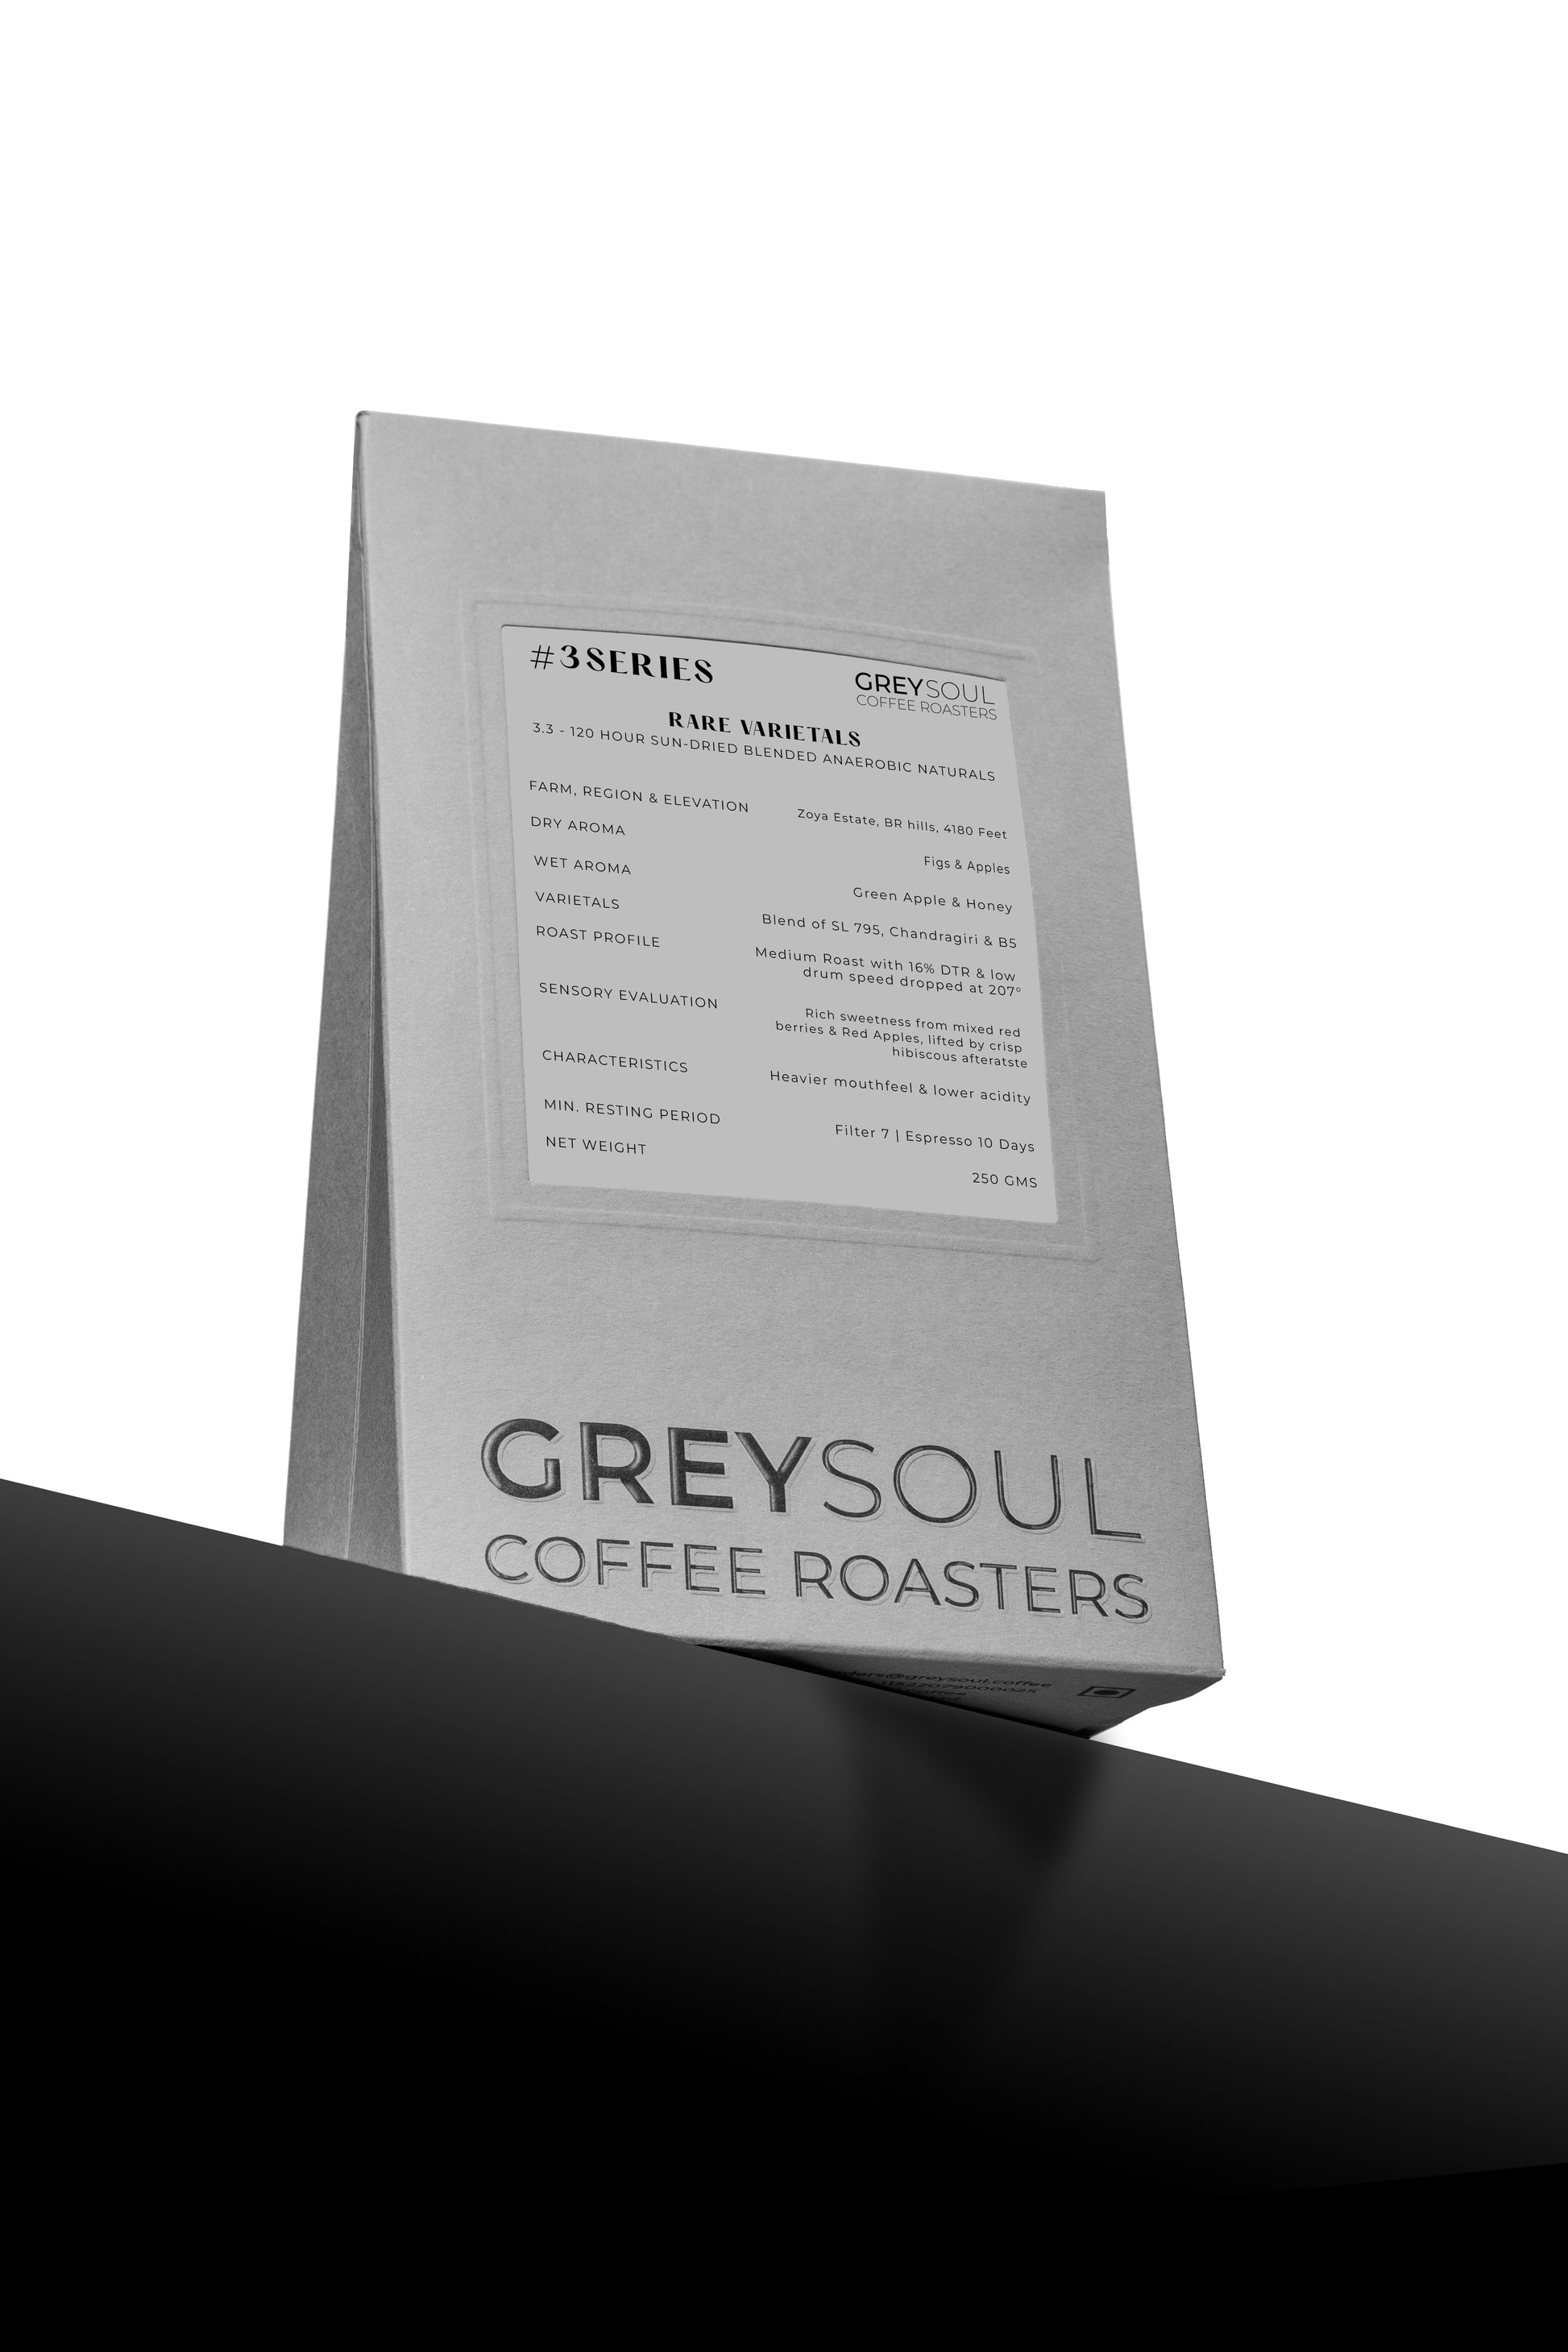 Specialty coffee roasters India Indian specialty coffee estates grey soul coffee roasters buy specialty coffee beans for French press and espresso